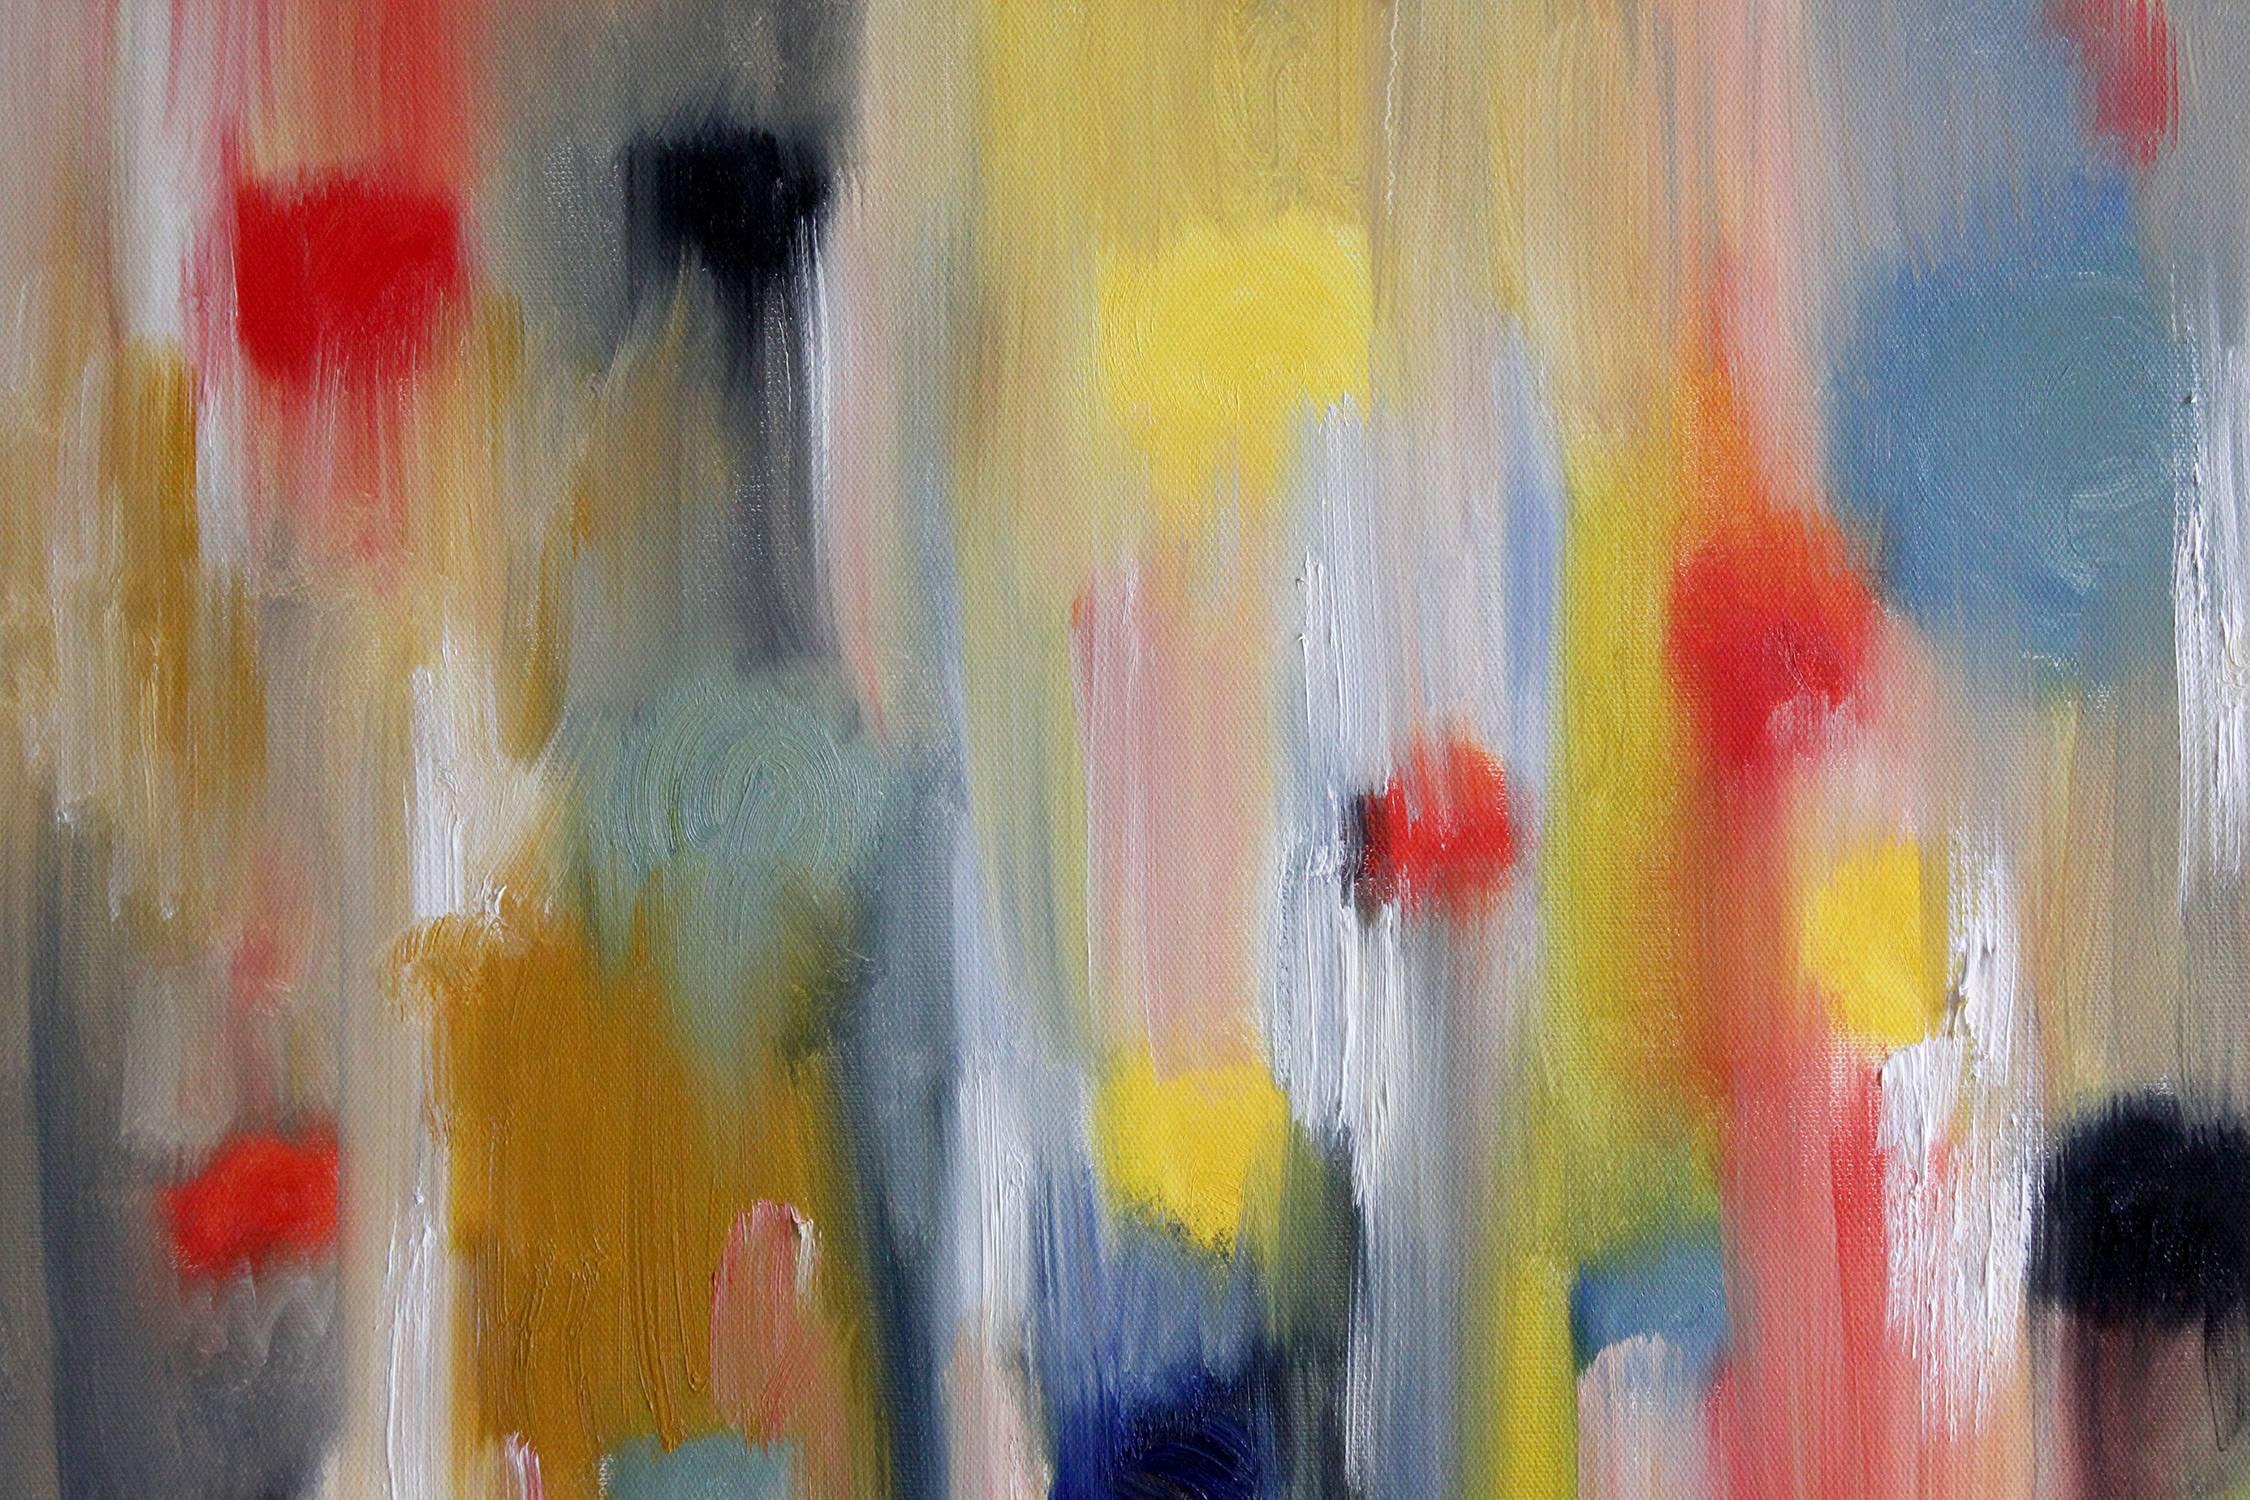 Dripping Dots, Lights of St. Barts - Abstract Expressionist Painting by Cindy Shaoul